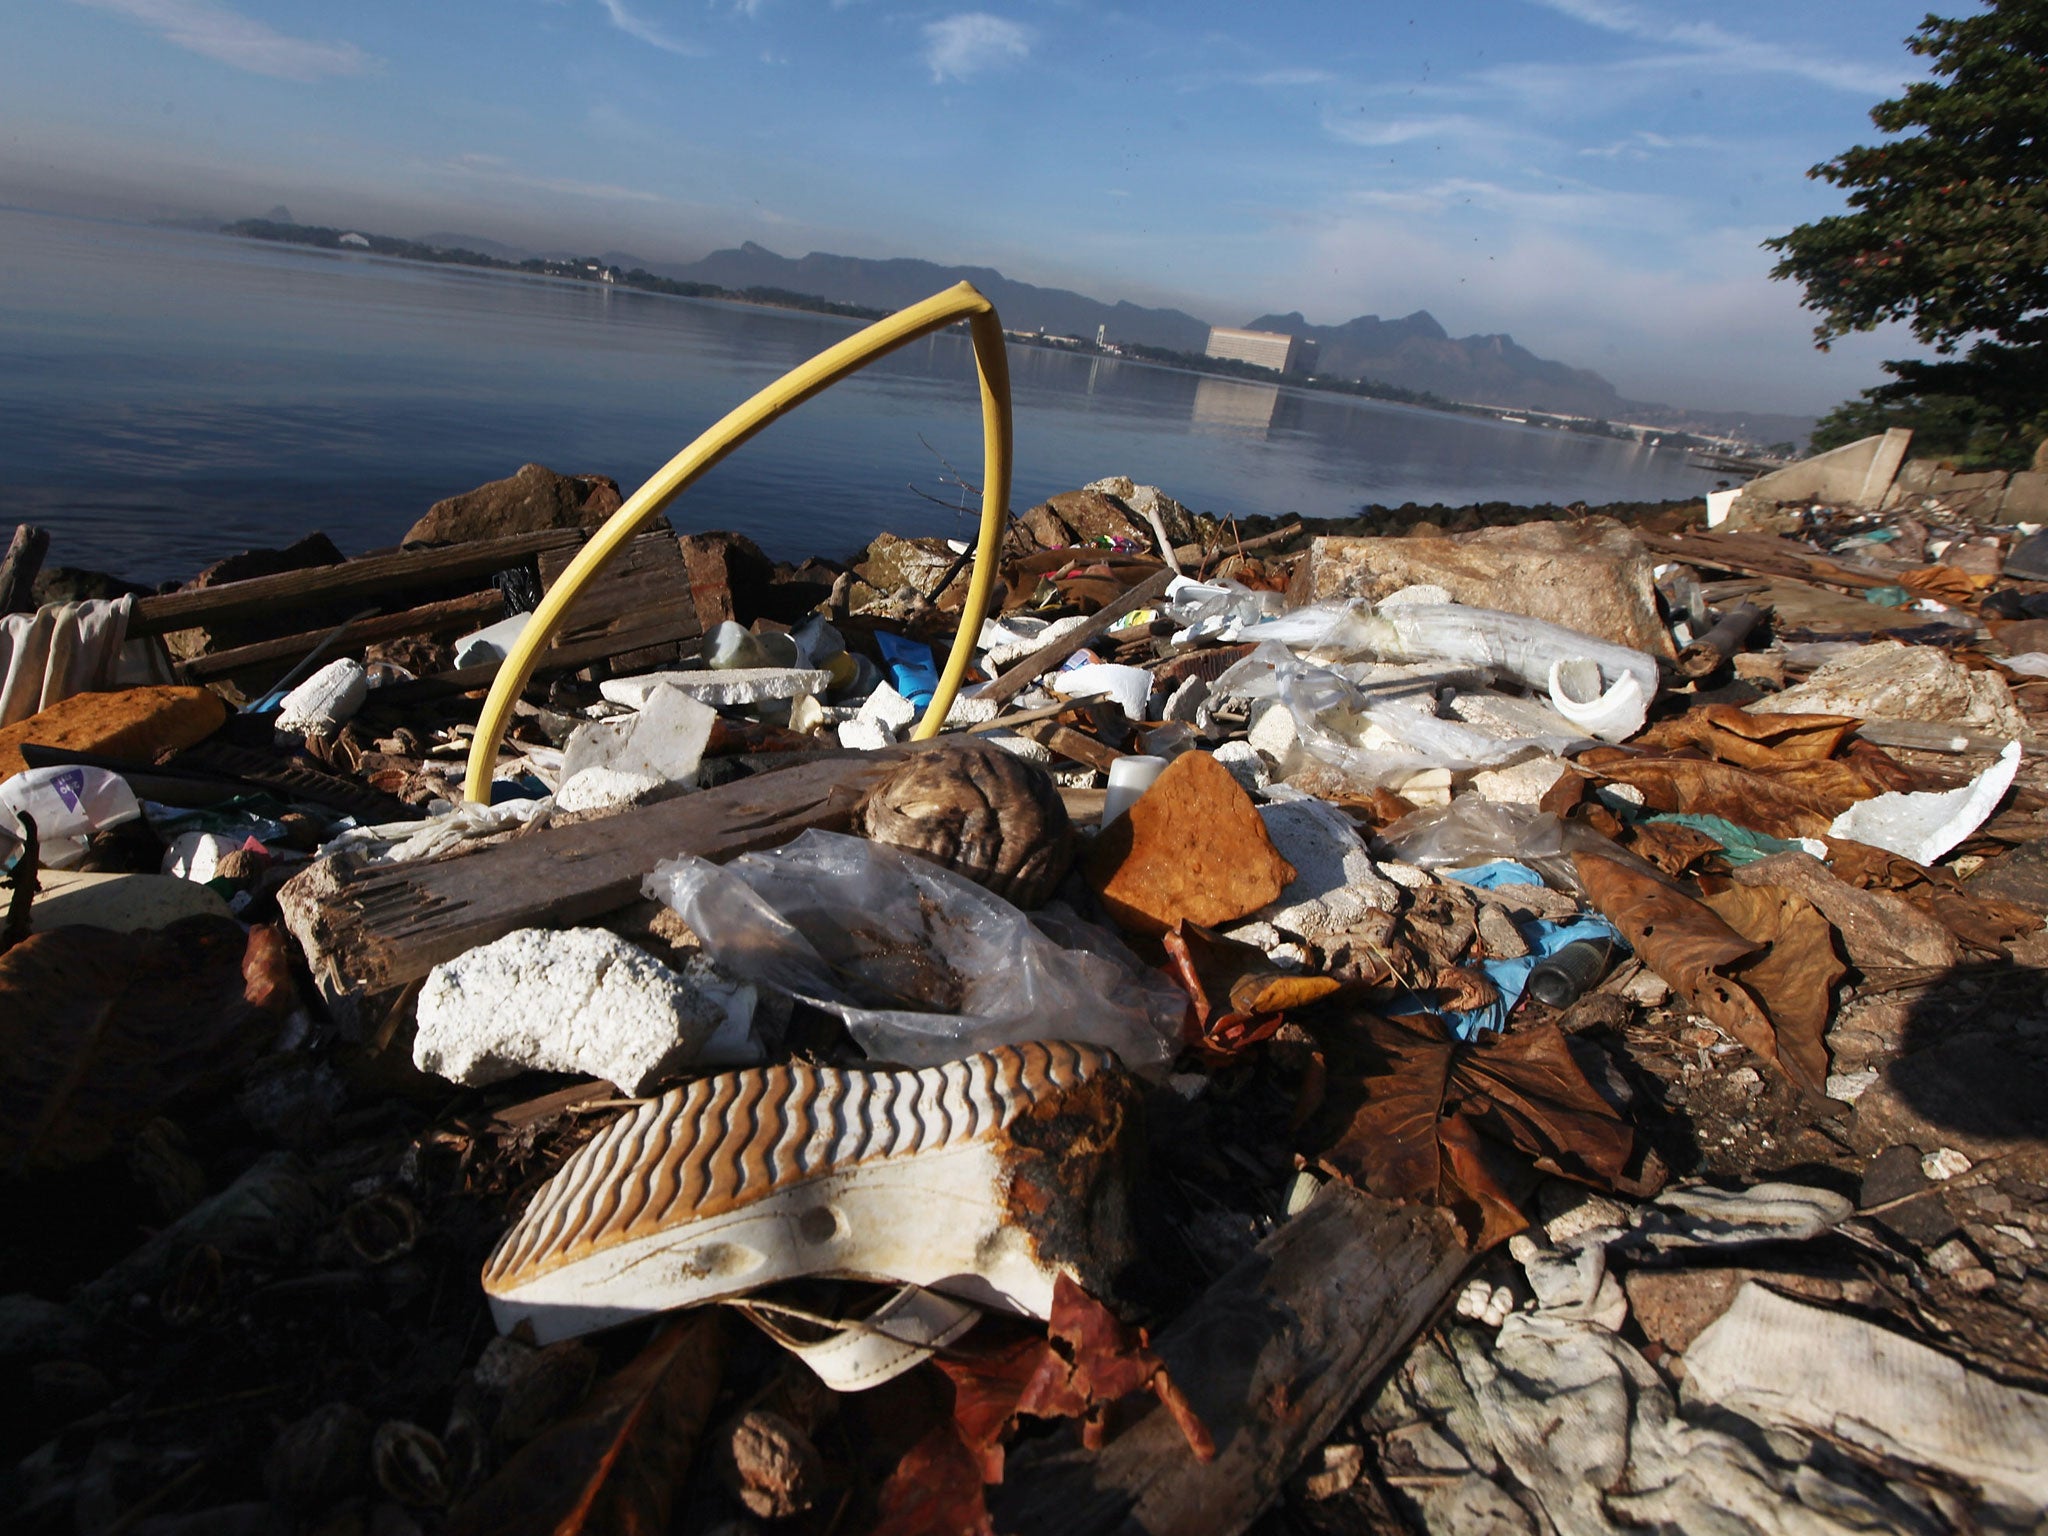 Guanabara Bay is seen in a section littered with debris on June 19, 2012